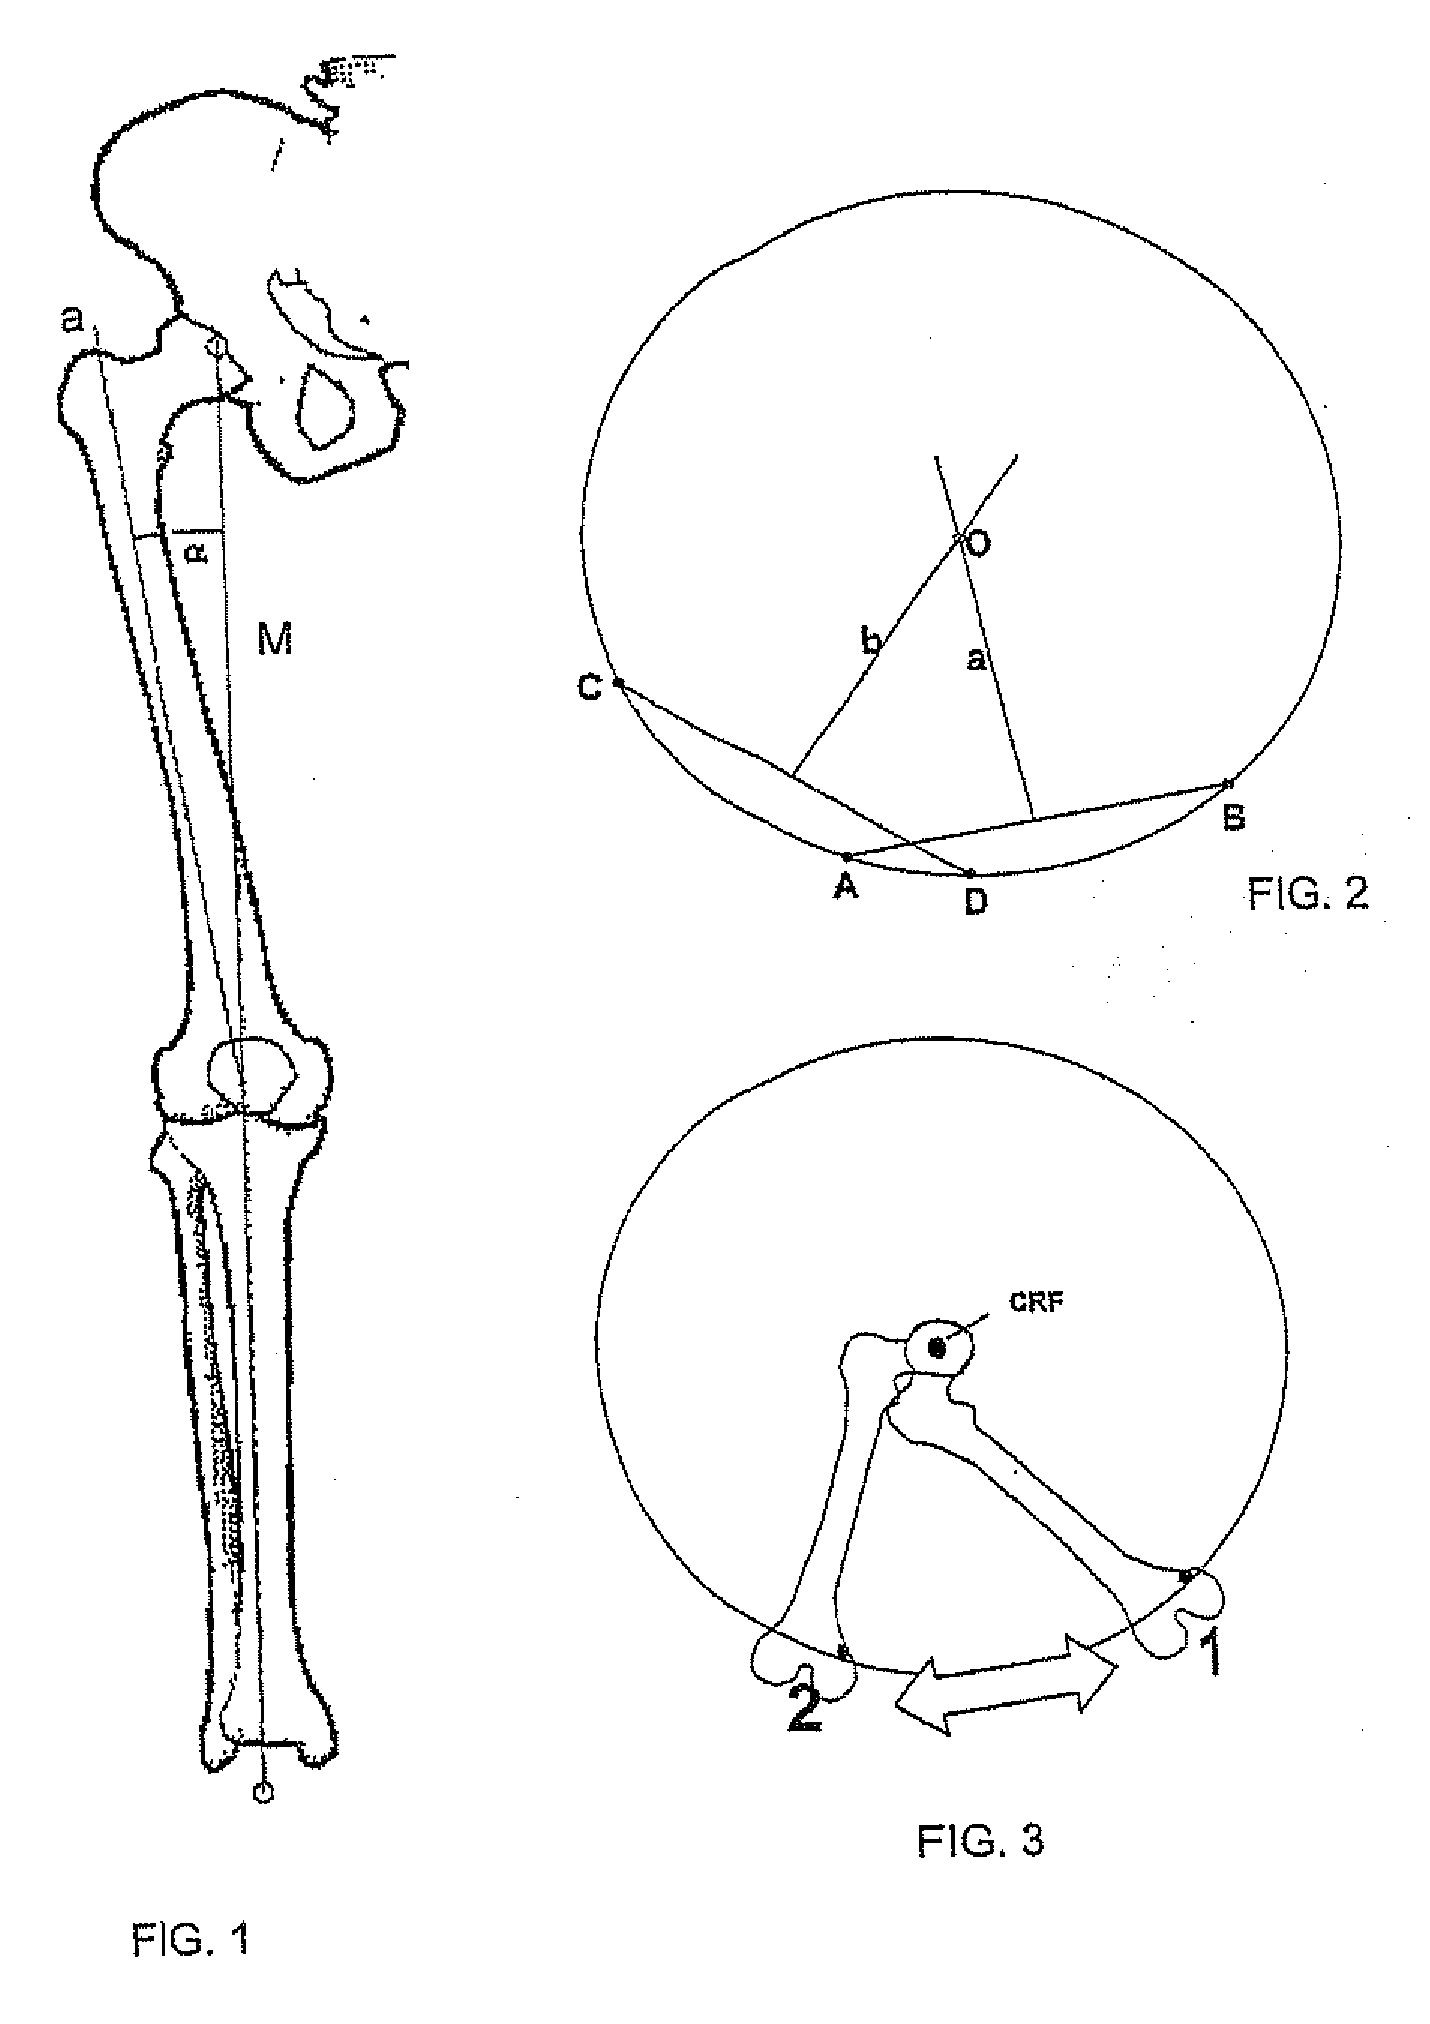 Sighting instrument for determining the mechanical axis of the femur